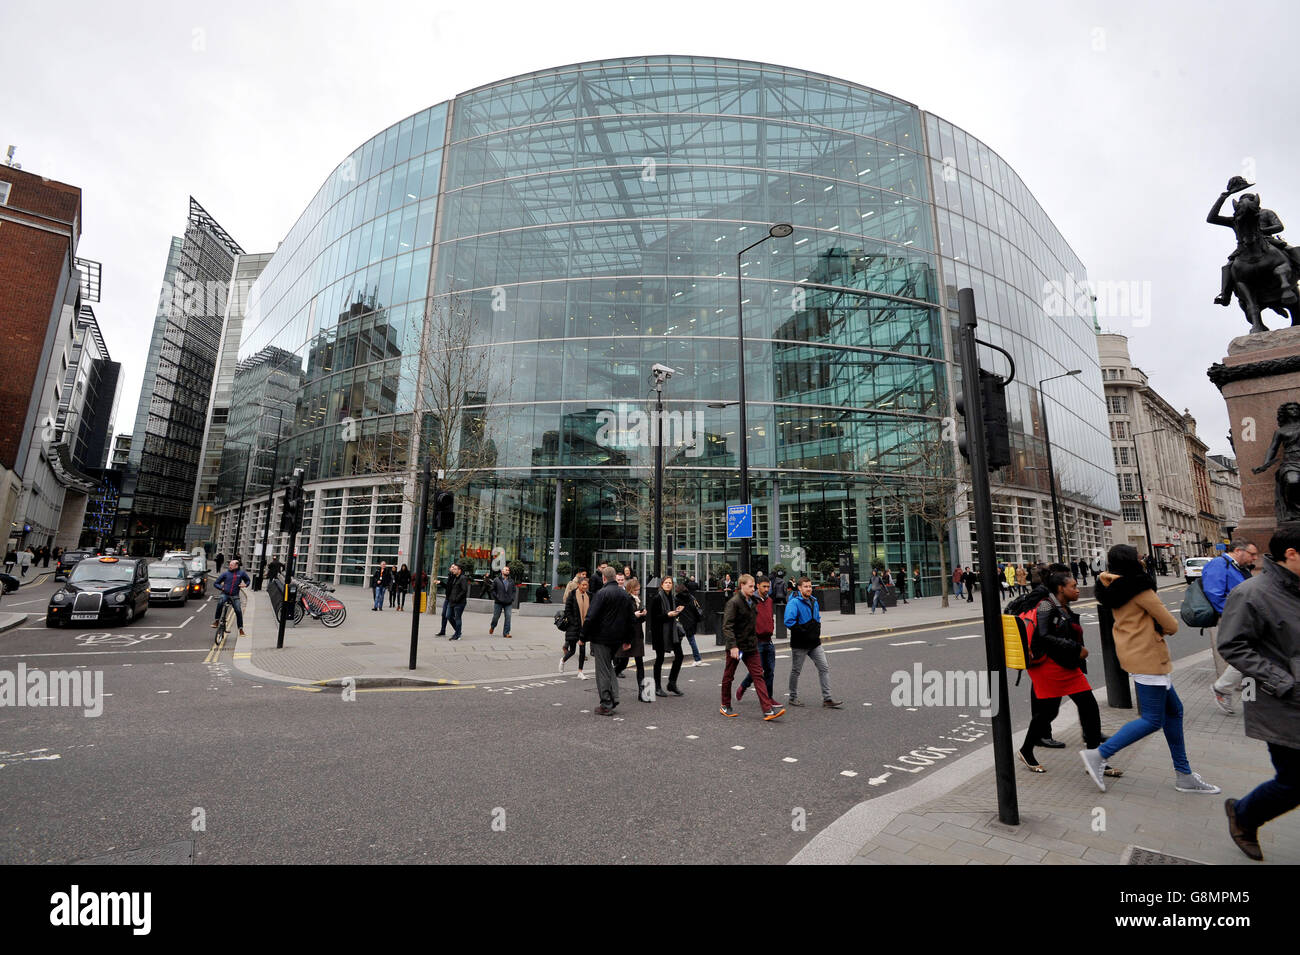 Sainsbury's head office at New Fetter Lane, Holborn Circus, central London. Stock Photo